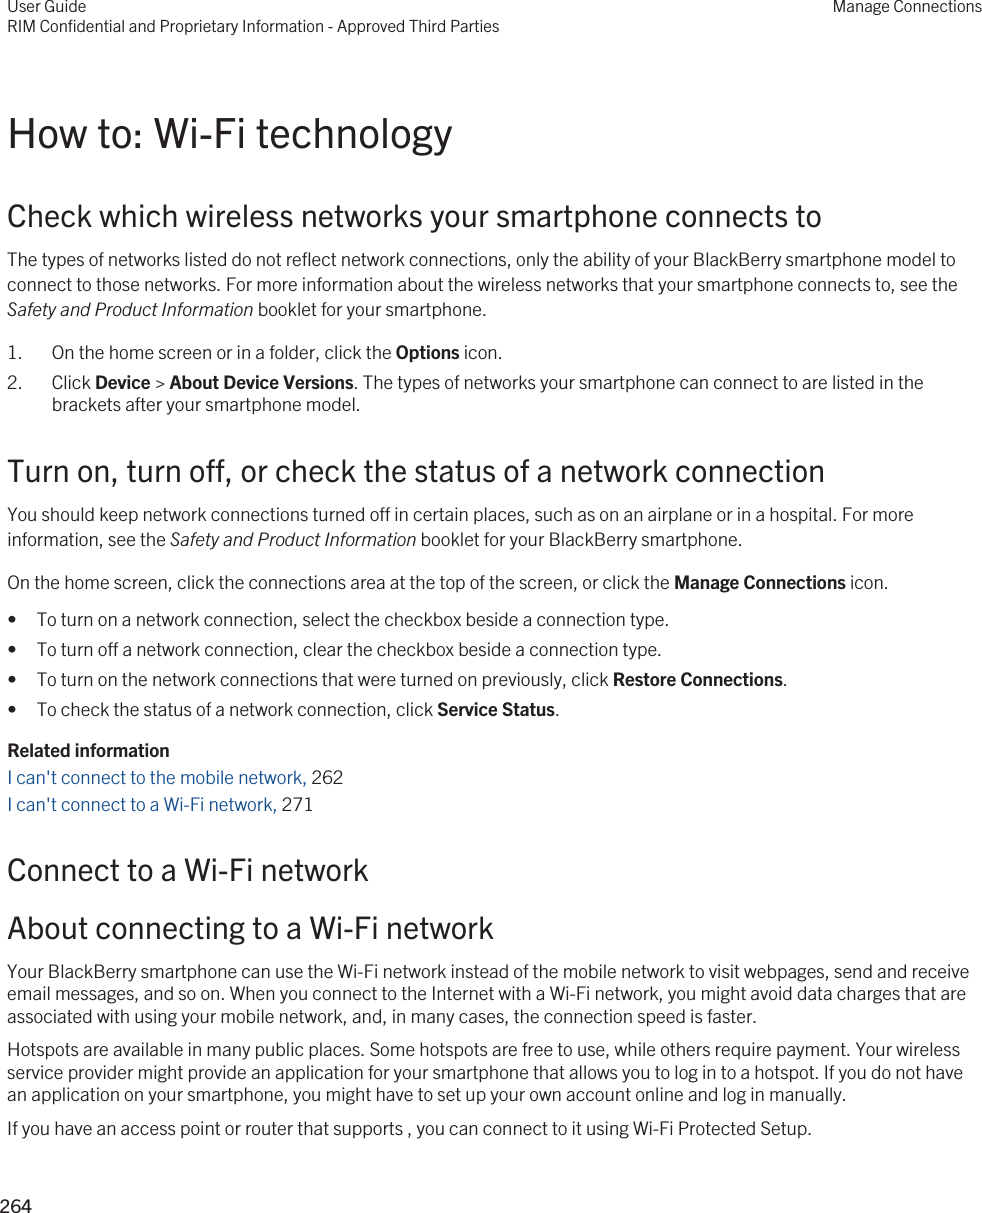 How to: Wi-Fi technologyCheck which wireless networks your smartphone connects toThe types of networks listed do not reflect network connections, only the ability of your BlackBerry smartphone model to connect to those networks. For more information about the wireless networks that your smartphone connects to, see the Safety and Product Information booklet for your smartphone.1. On the home screen or in a folder, click the Options icon.2. Click Device &gt; About Device Versions. The types of networks your smartphone can connect to are listed in the brackets after your smartphone model.Turn on, turn off, or check the status of a network connectionYou should keep network connections turned off in certain places, such as on an airplane or in a hospital. For more information, see the Safety and Product Information booklet for your BlackBerry smartphone.On the home screen, click the connections area at the top of the screen, or click the Manage Connections icon.• To turn on a network connection, select the checkbox beside a connection type.• To turn off a network connection, clear the checkbox beside a connection type.• To turn on the network connections that were turned on previously, click Restore Connections.• To check the status of a network connection, click Service Status.Related informationI can&apos;t connect to the mobile network, 262 I can&apos;t connect to a Wi-Fi network, 271Connect to a Wi-Fi networkAbout connecting to a Wi-Fi networkYour BlackBerry smartphone can use the Wi-Fi network instead of the mobile network to visit webpages, send and receive email messages, and so on. When you connect to the Internet with a Wi-Fi network, you might avoid data charges that are associated with using your mobile network, and, in many cases, the connection speed is faster.Hotspots are available in many public places. Some hotspots are free to use, while others require payment. Your wireless service provider might provide an application for your smartphone that allows you to log in to a hotspot. If you do not have an application on your smartphone, you might have to set up your own account online and log in manually.If you have an access point or router that supports , you can connect to it using Wi-Fi Protected Setup.User GuideRIM Confidential and Proprietary Information - Approved Third PartiesManage Connections264 